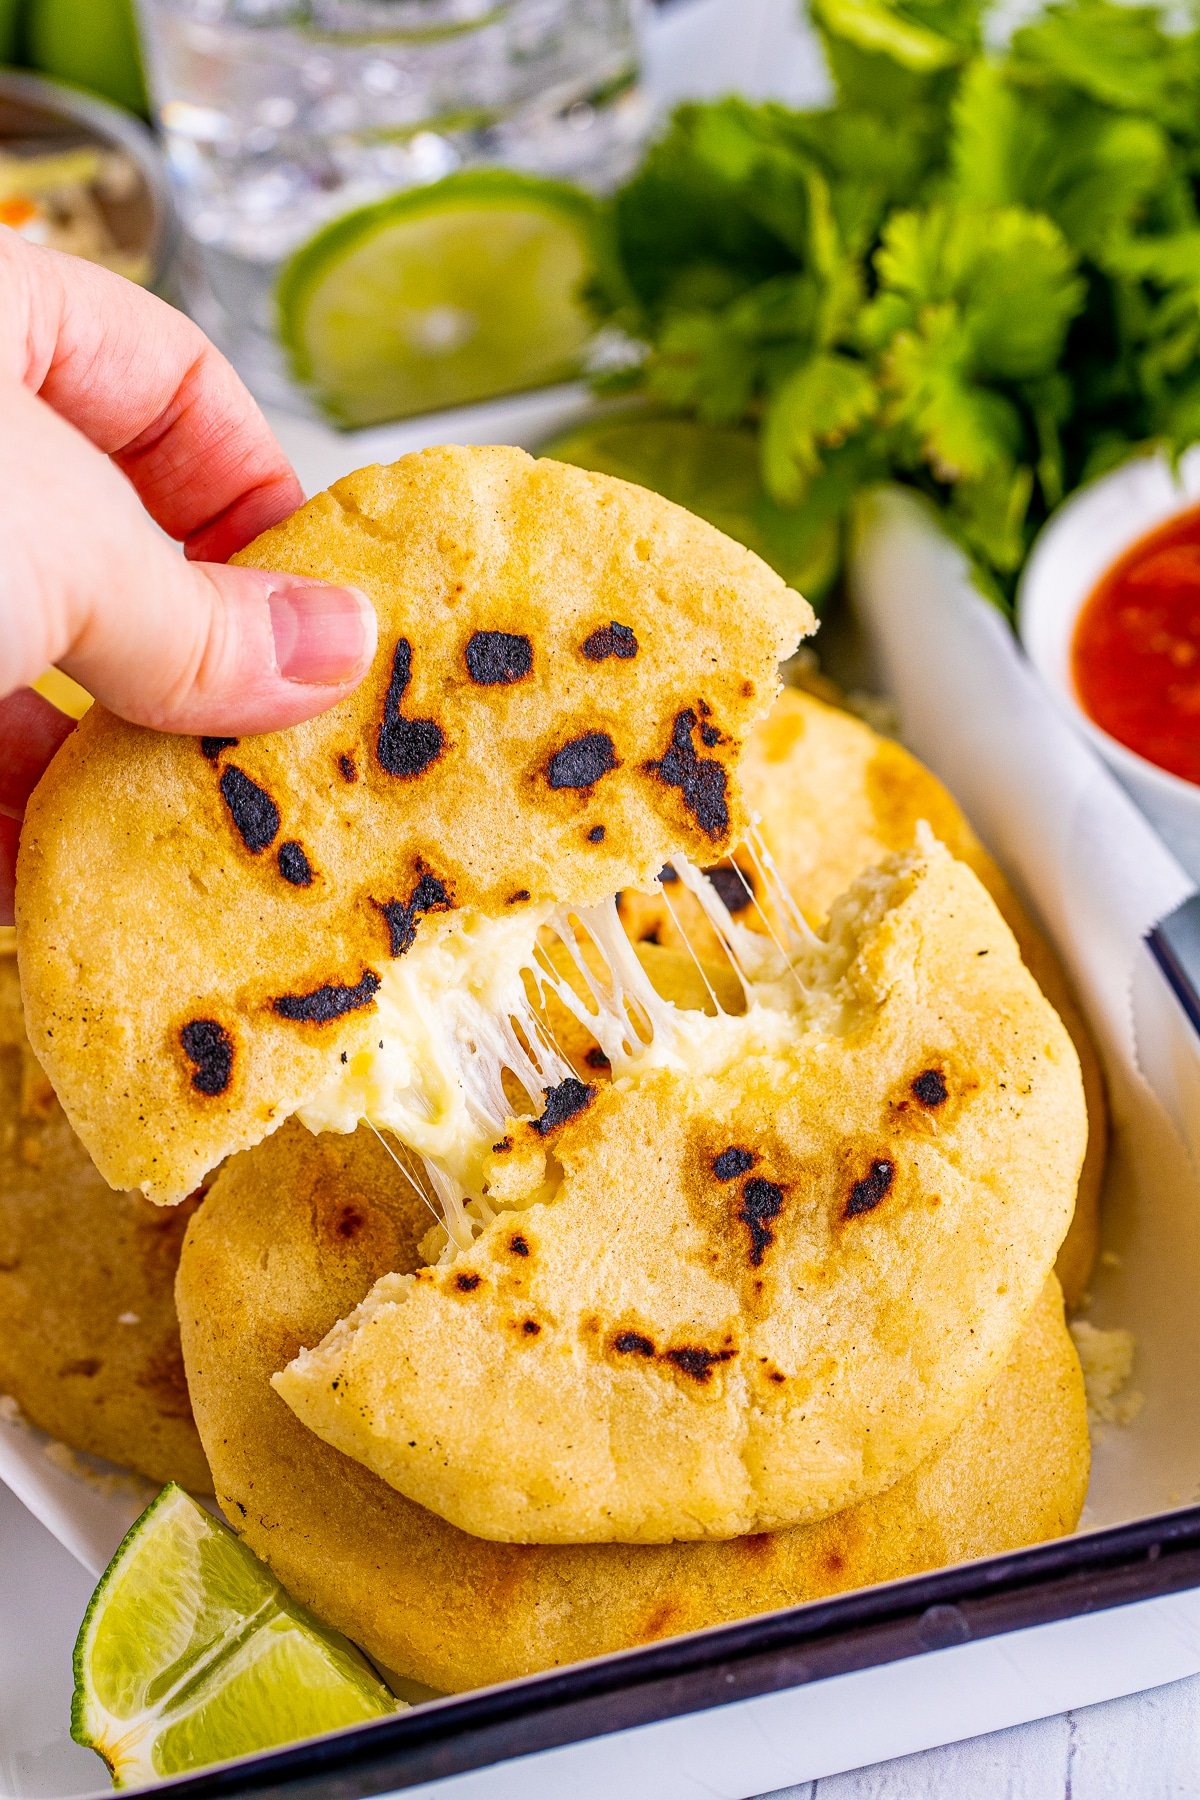 Hand pulling apart one Pupusa showing cheese inside.